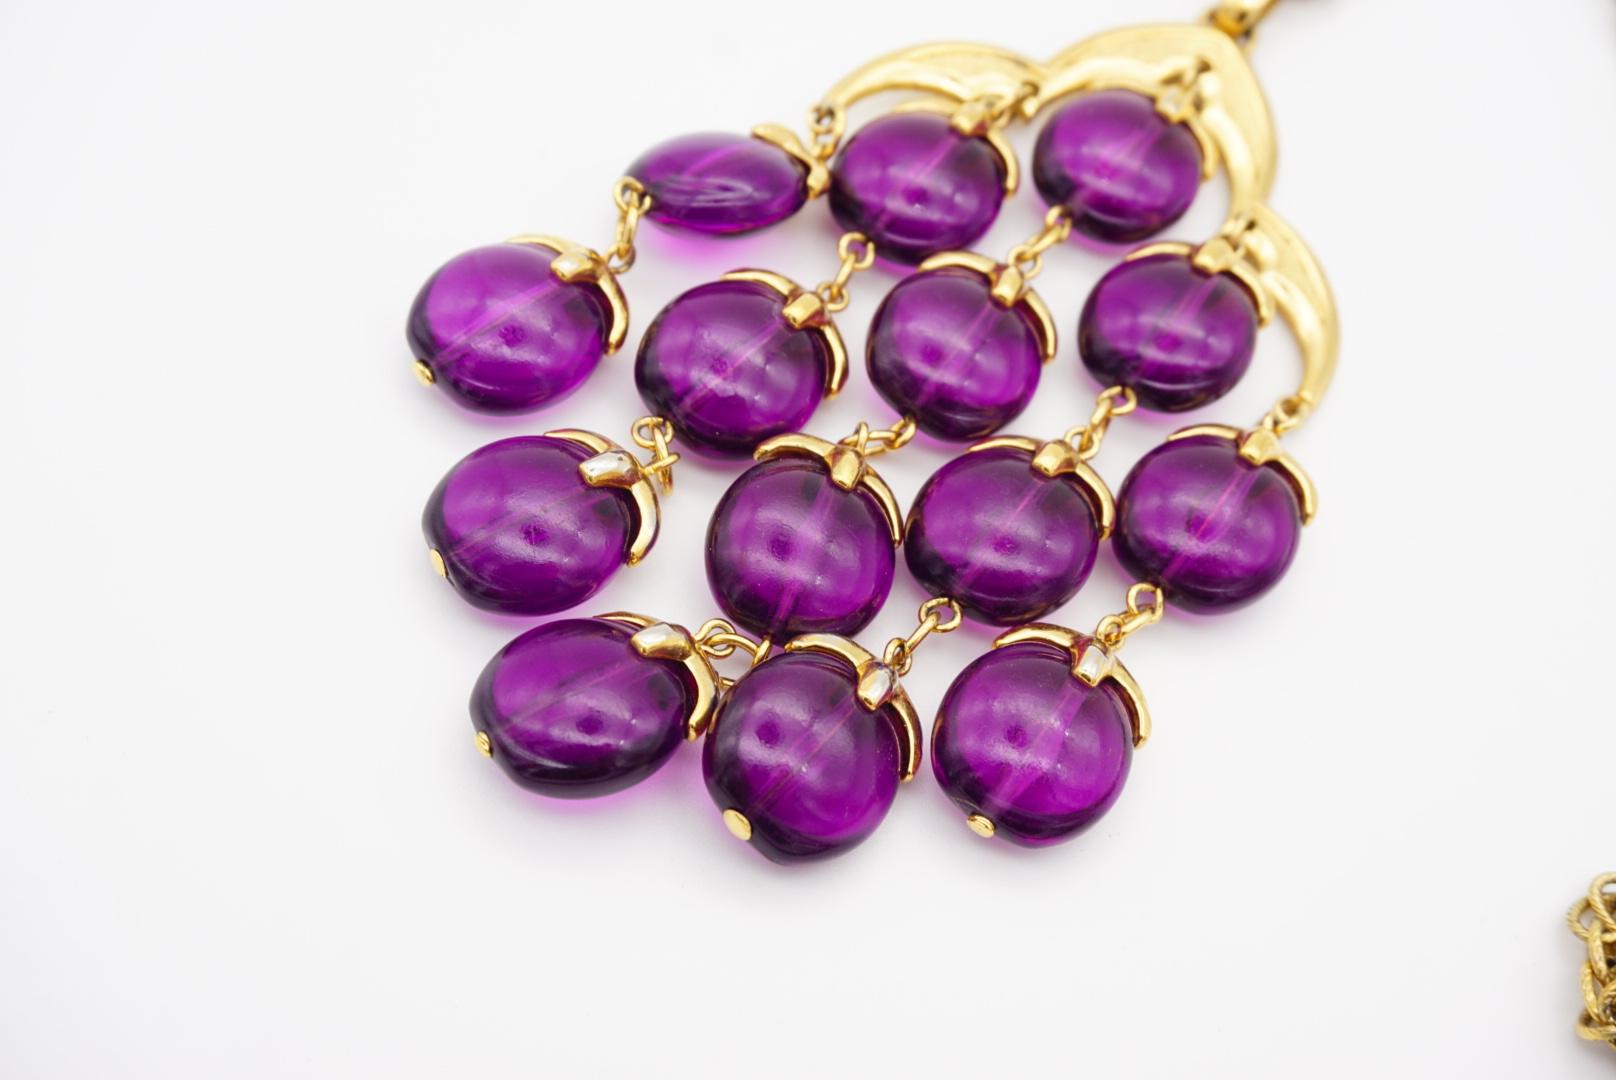 Crown Trifari Vintage 1950s Long Layers Purple Lucite Waterfall Pendant Necklace For Sale 2